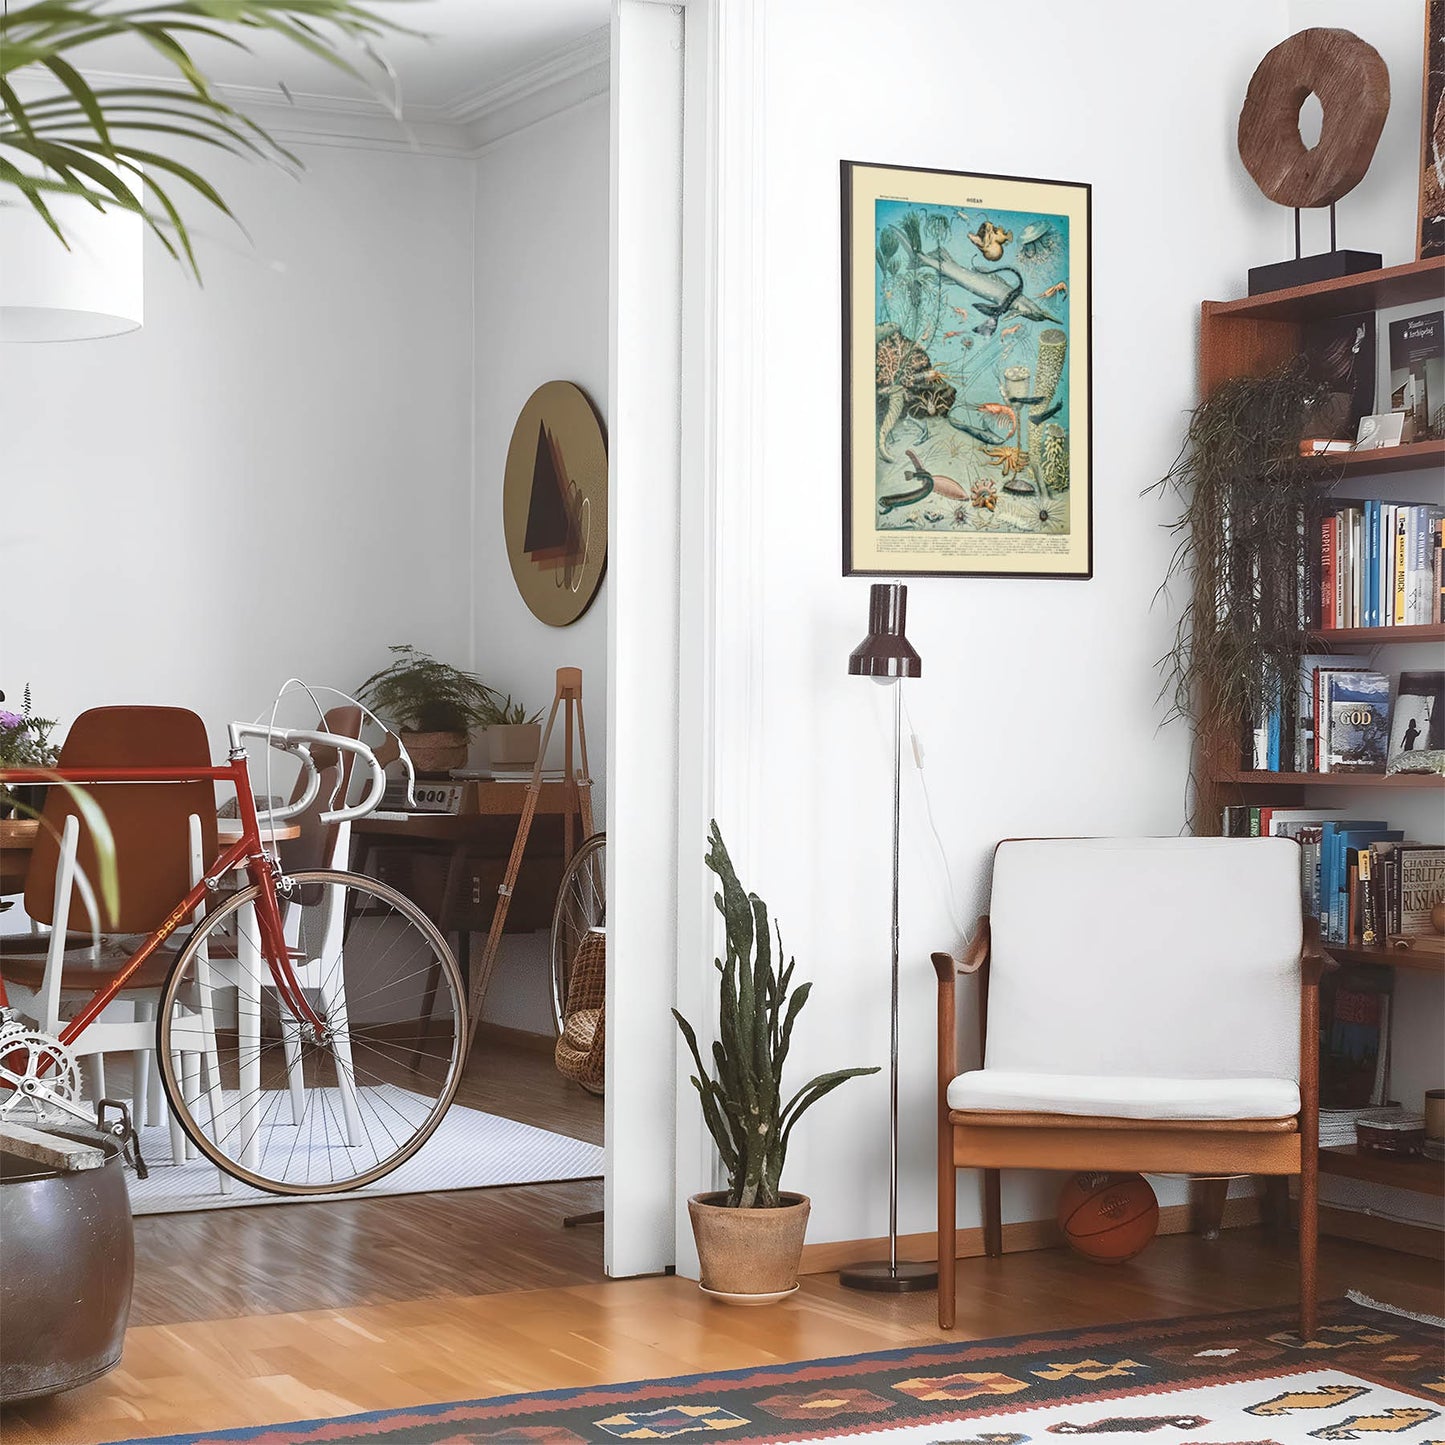 Eclectic living room with a road bike, bookshelf and house plants that features framed artwork of a Shrimp and Sharks above a chair and lamp